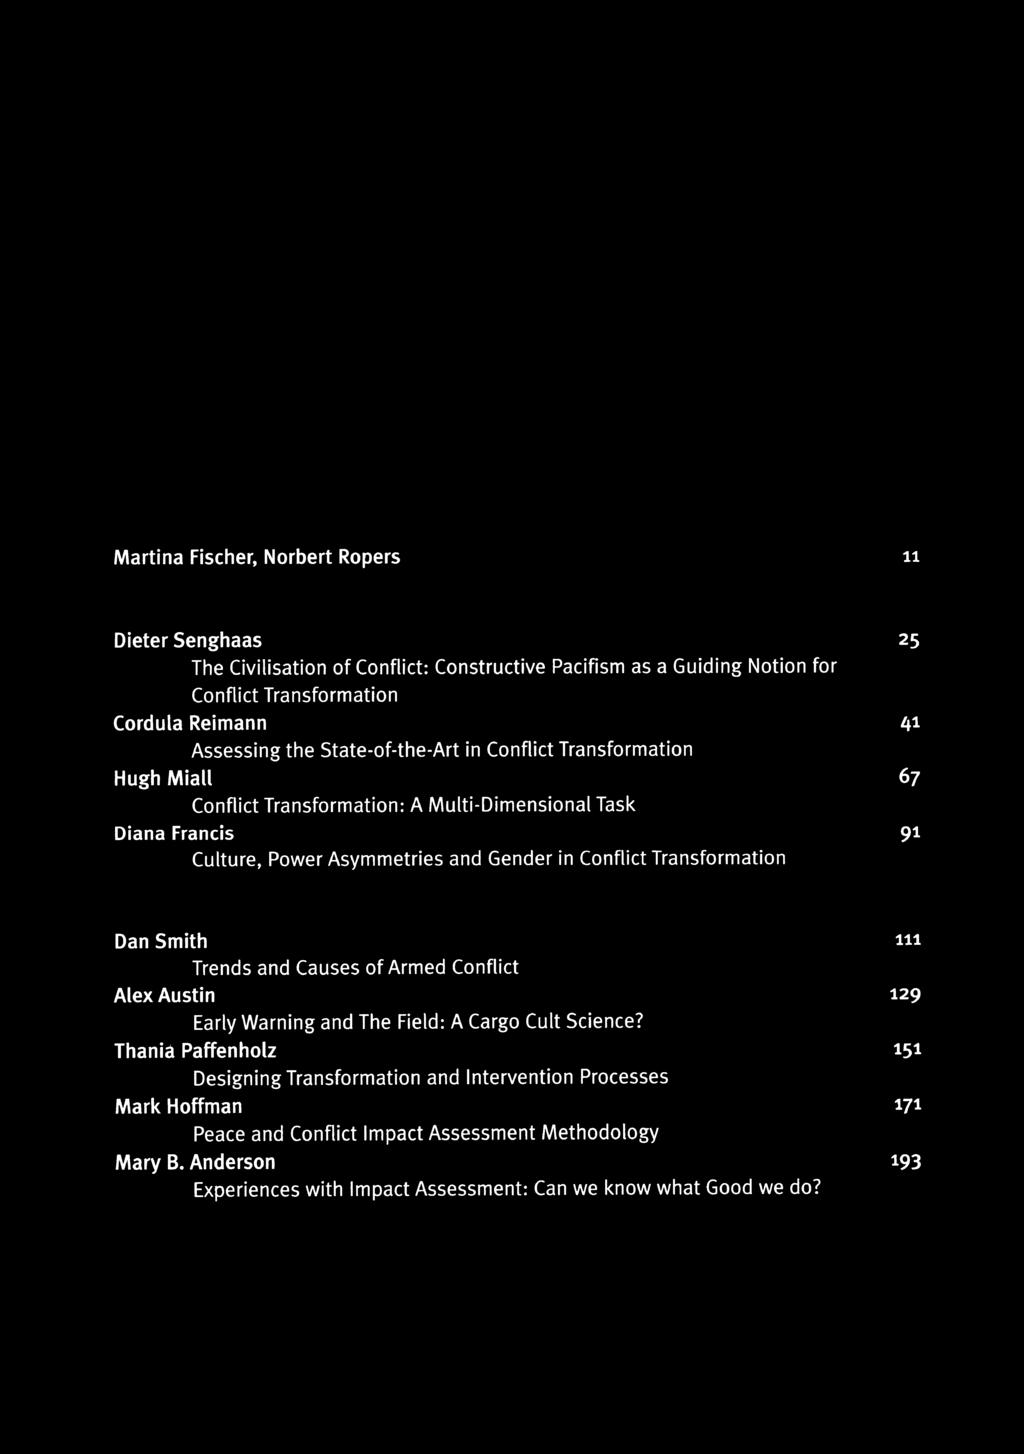 Research Center for Constructive Conflict Management Preface Introduction Martina Fischer, Norbert Ropers Concep s nd Cro s Cutting Challenges Dieter Senghaas The Civilisation of Conflict: